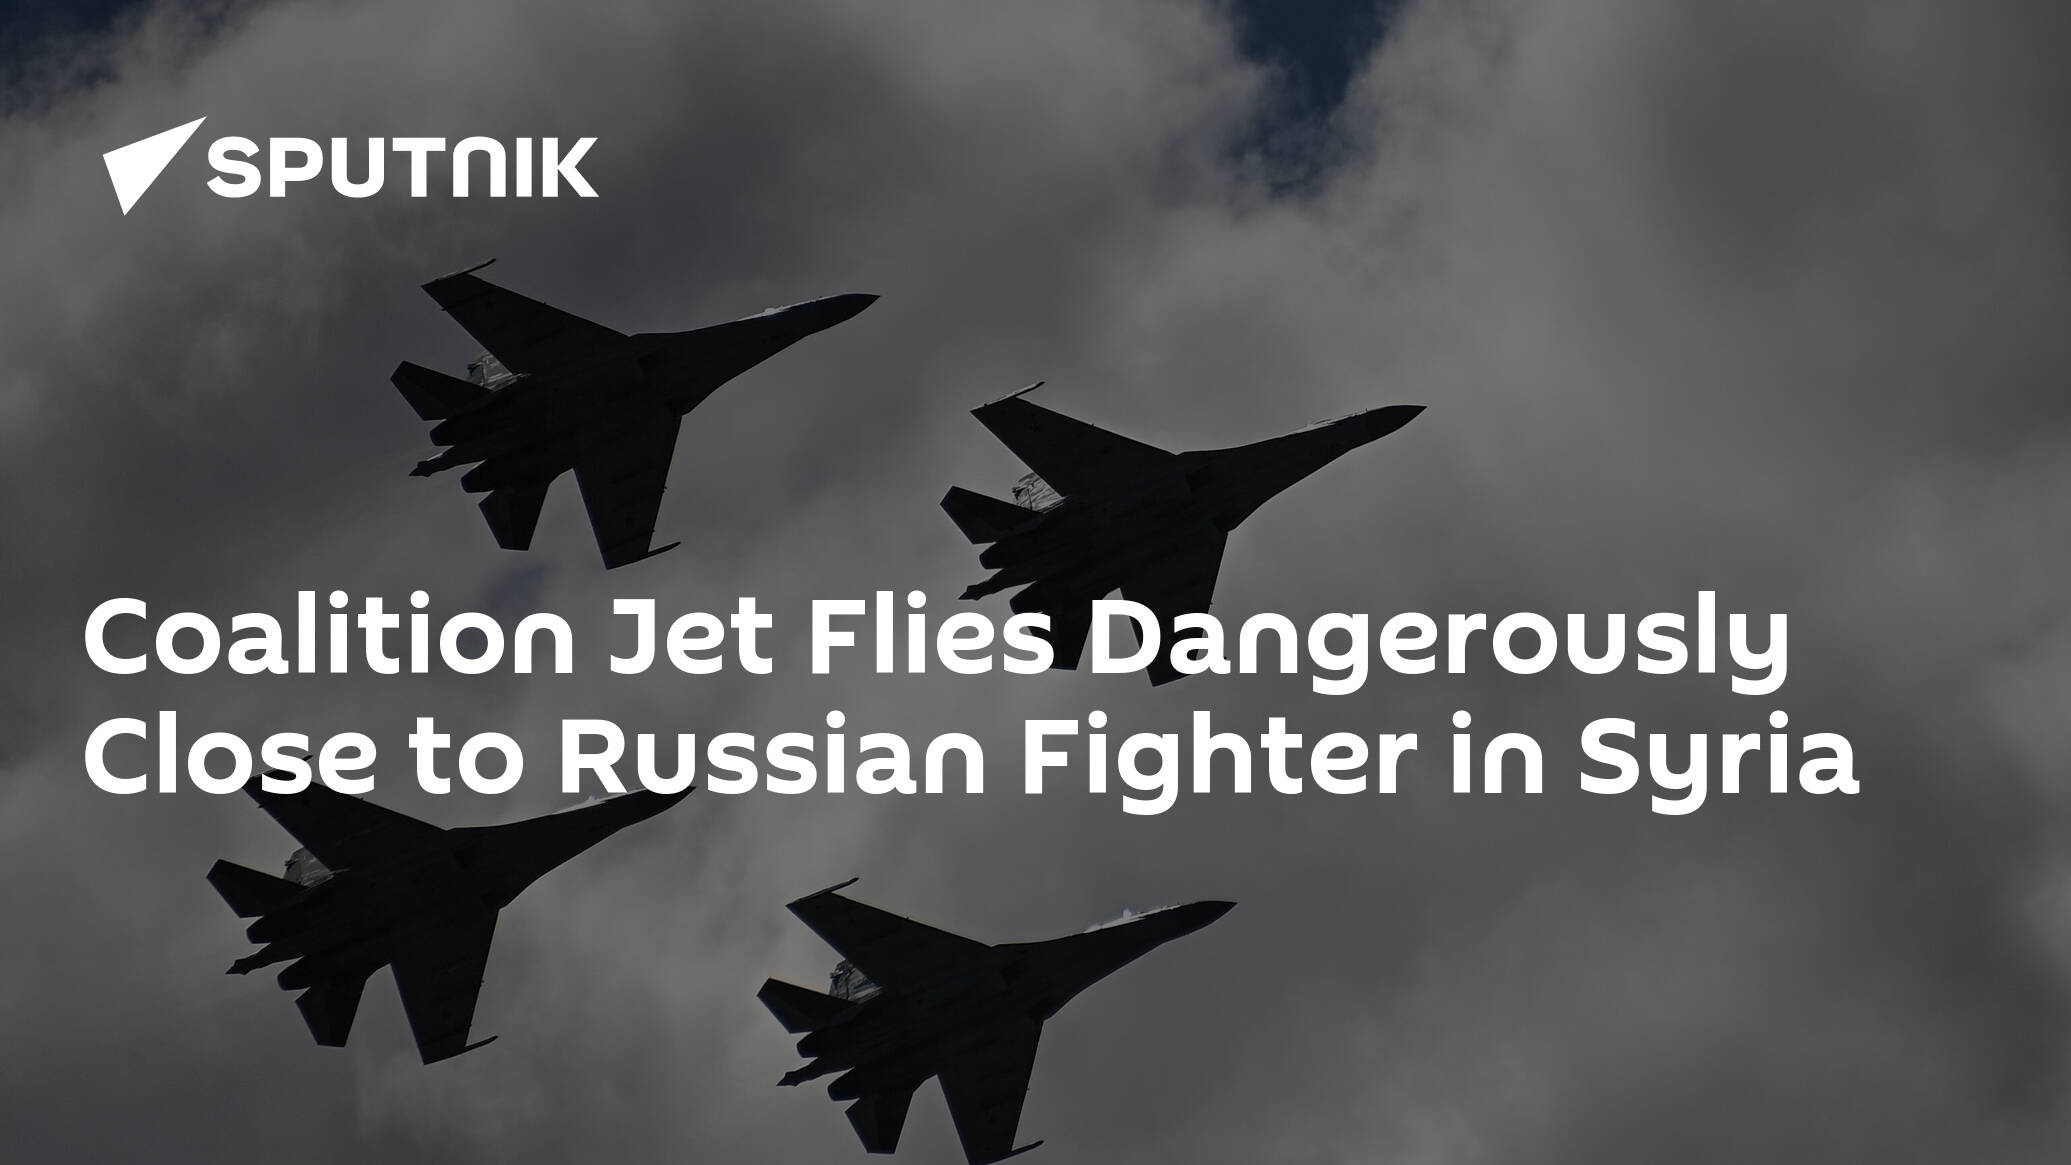 Coalition Jet Flies Dangerously Close to Russian Fighter in Syria